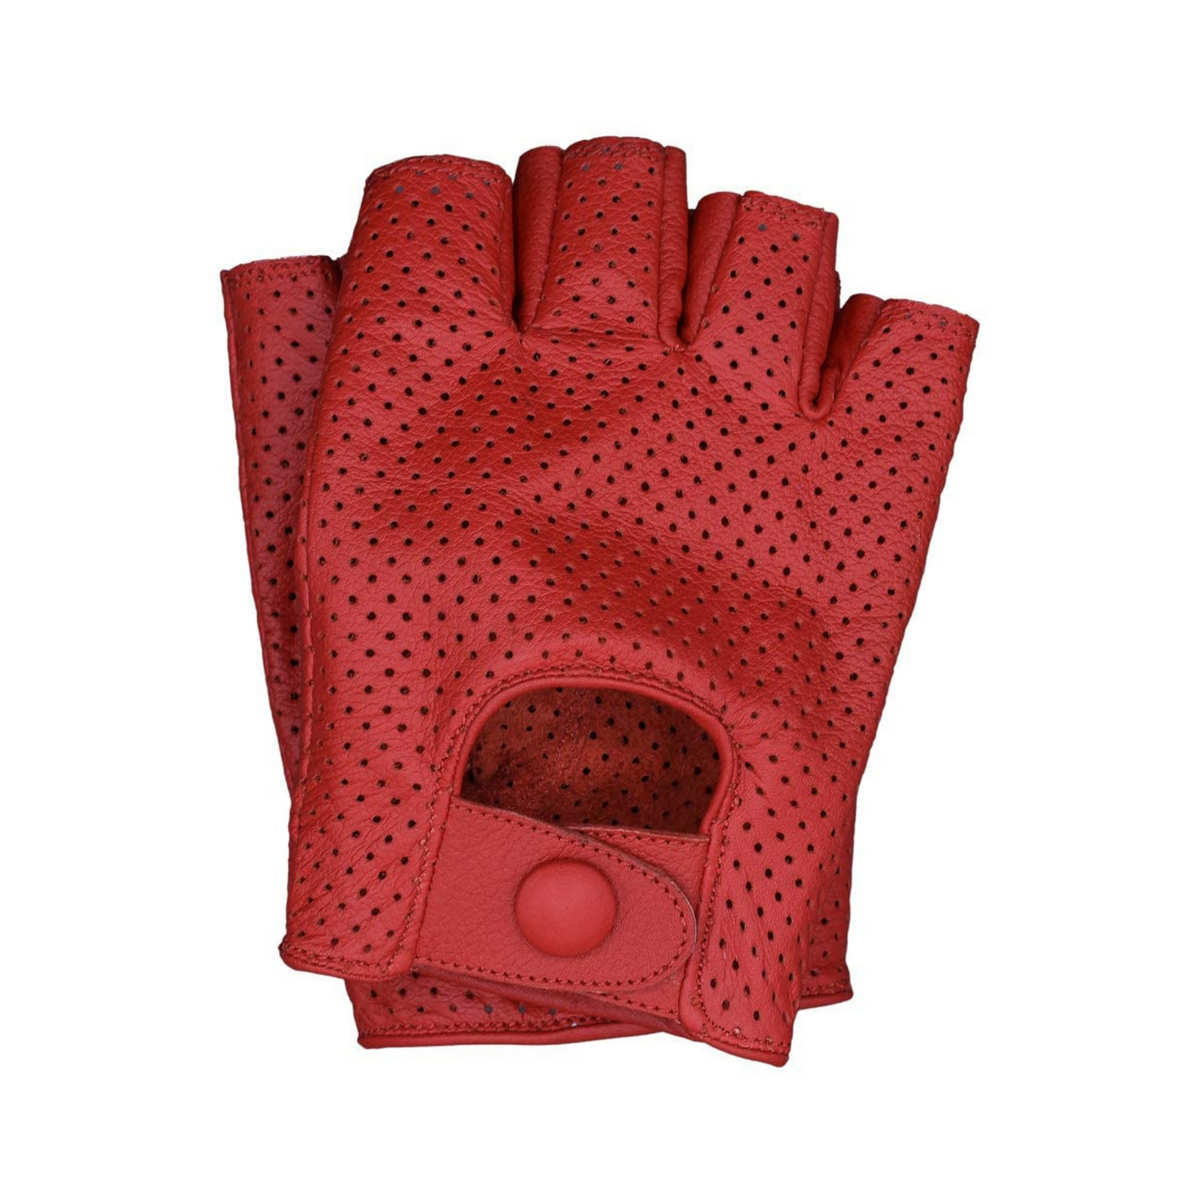 Sedici Marco 2 Mesh Gloves MD